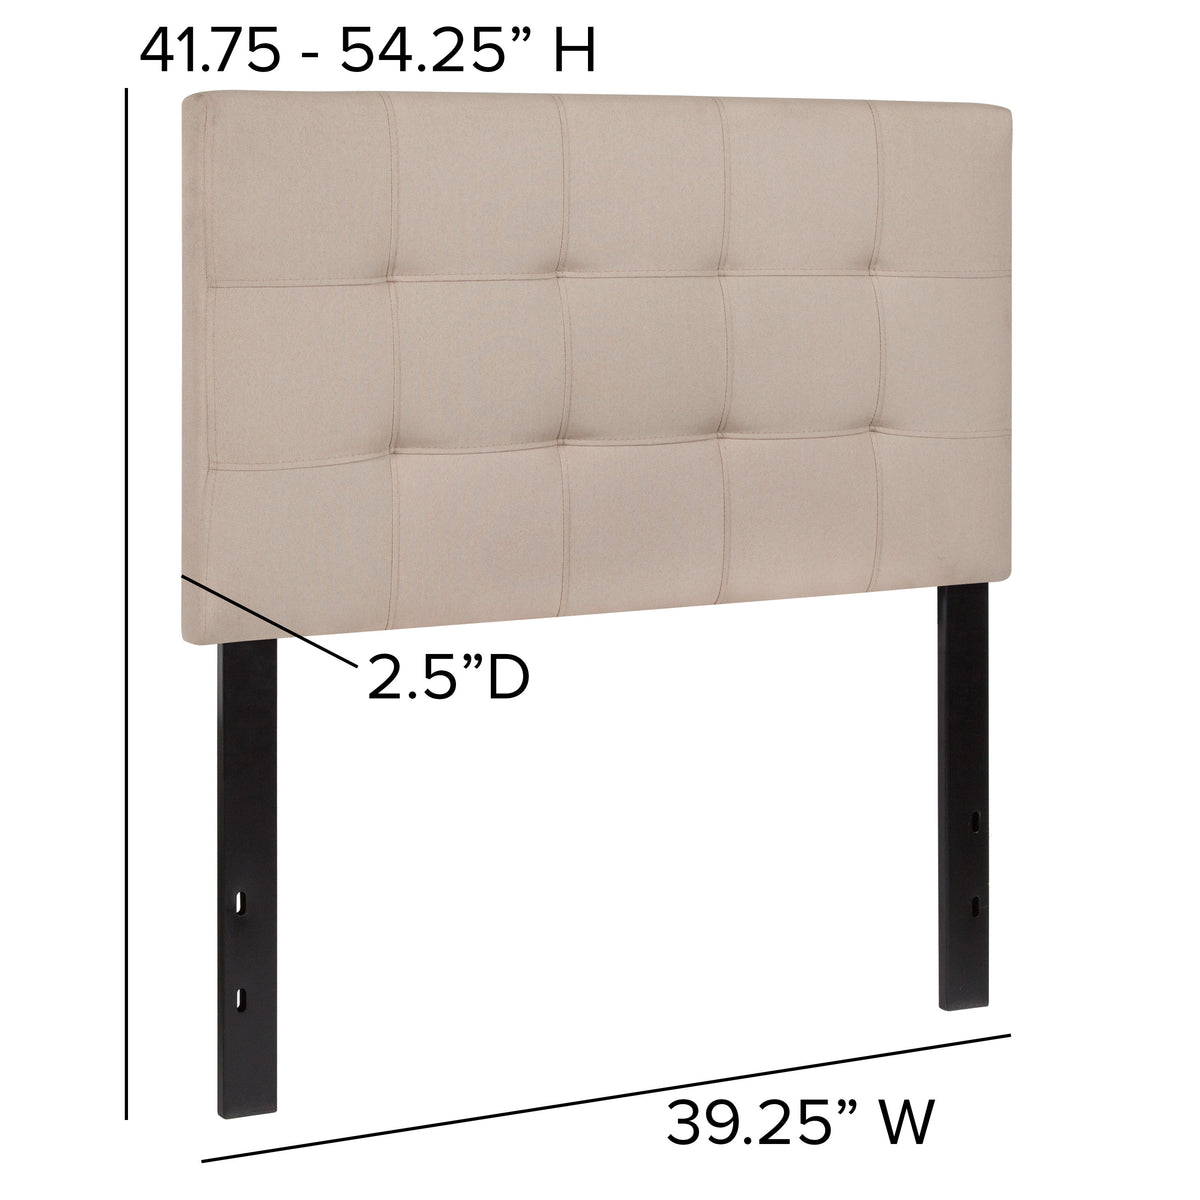 Beige,Twin |#| Quilted Tufted Upholstered Twin Size Headboard in Beige Fabric